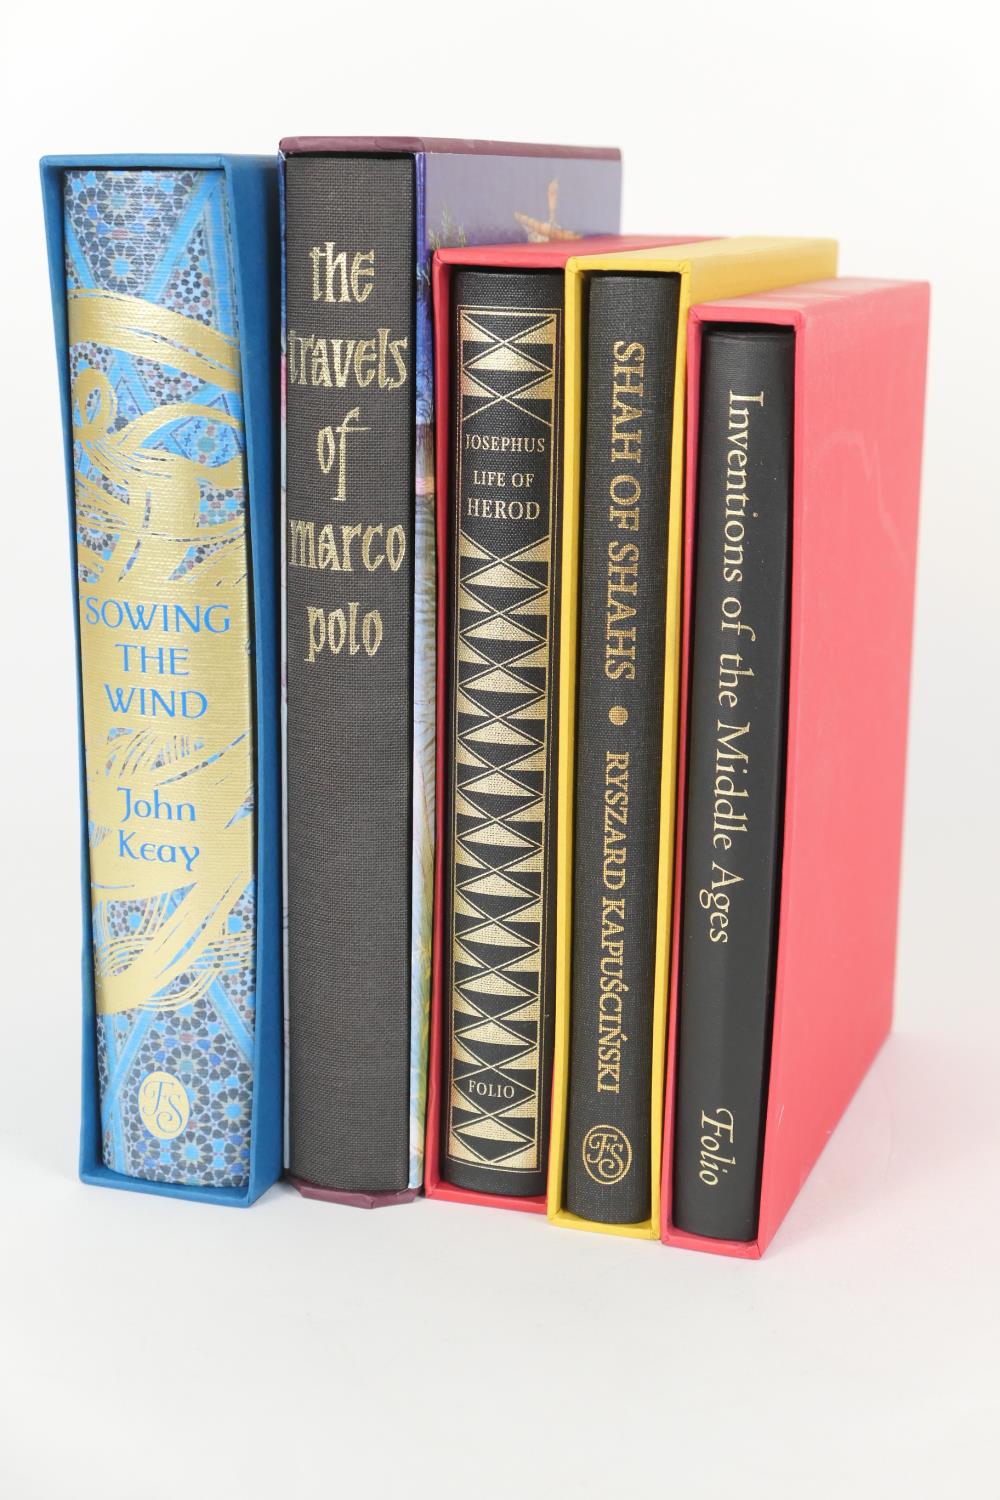 Folio Society - John Keay 'Sowing the Wind'; also 'The travels of Marco Polo' and three further